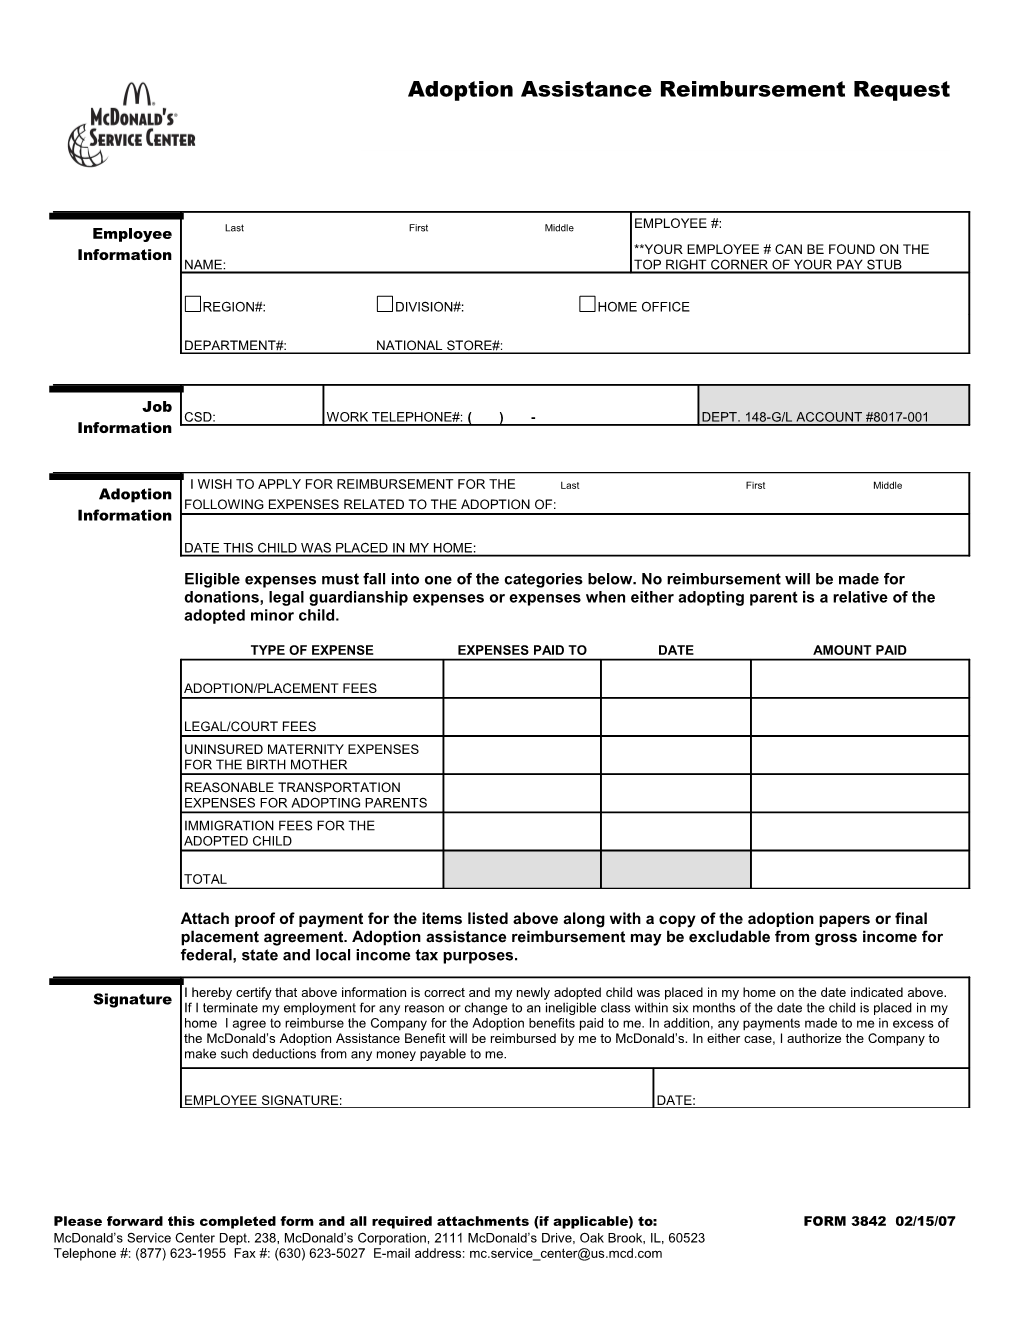 Please Forward This Completed Form and All Required Attachments (If Applicable) To: FORM